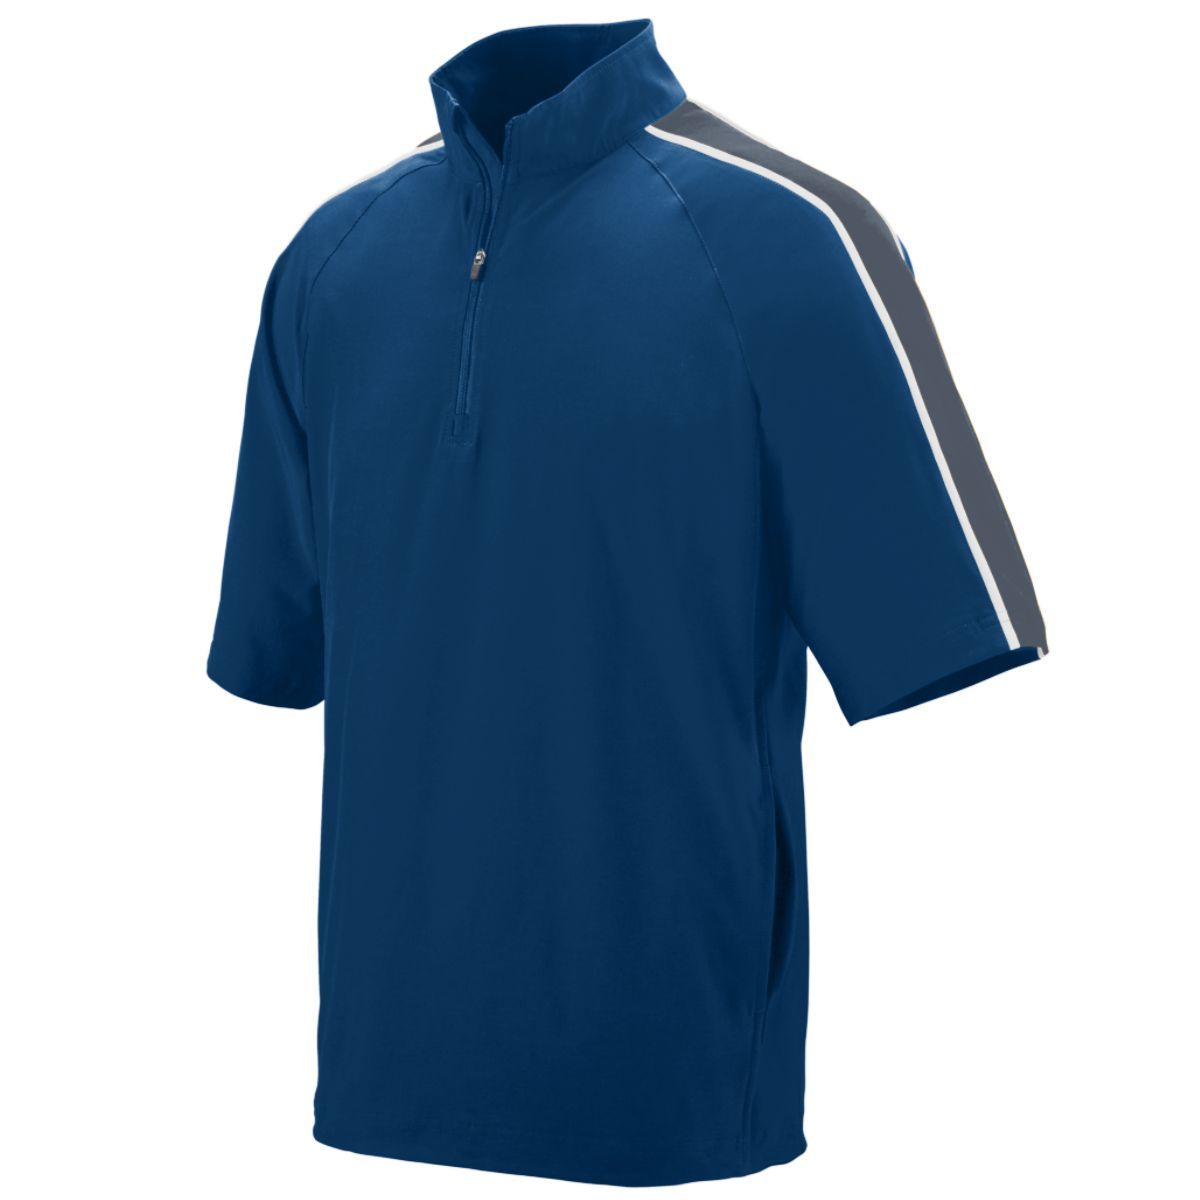 Augusta Sportswear Quantum Short Sleeve Pullover in Navy/Graphite/White  -Part of the Adult, Adult-Jacket, Augusta-Products, Outerwear product lines at KanaleyCreations.com